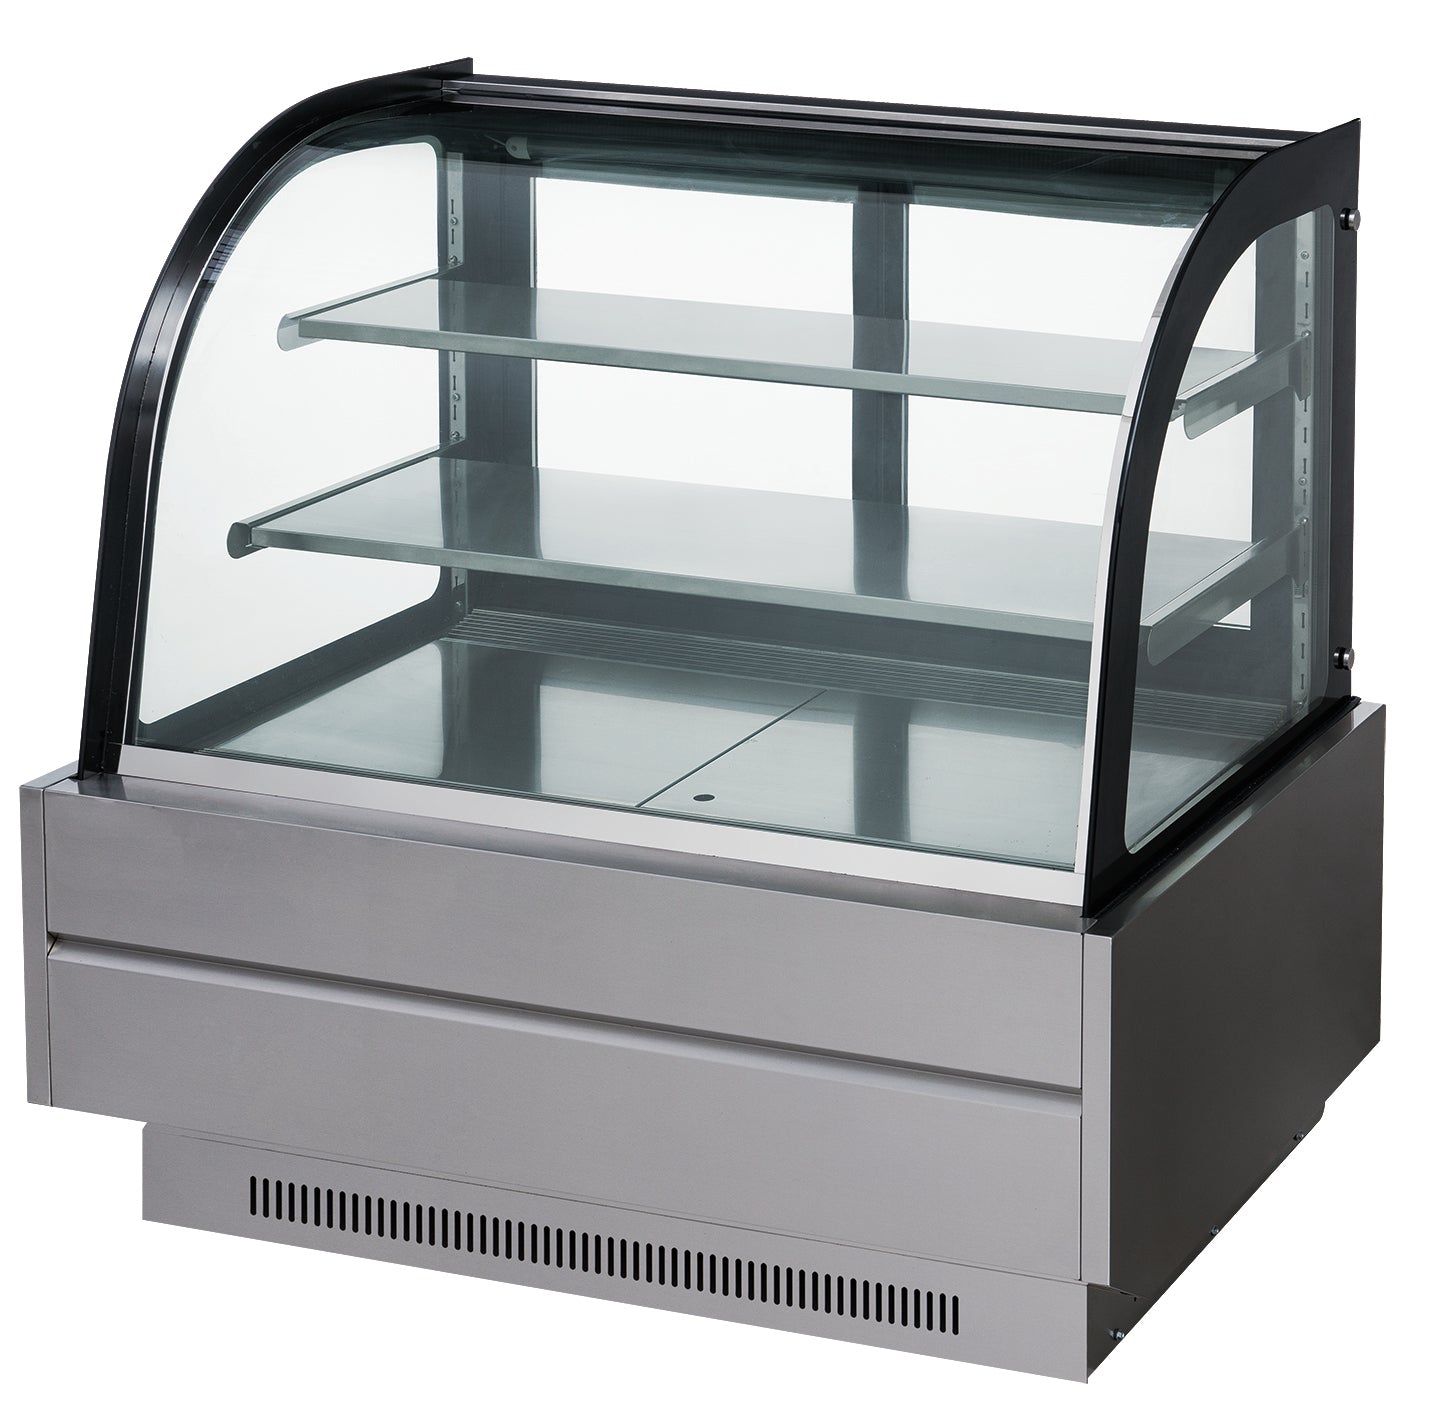 Chef AAA - CV-150, Commercial 60" Display Case Refrigerator Showcase (5 Feet) Pastry Bakery